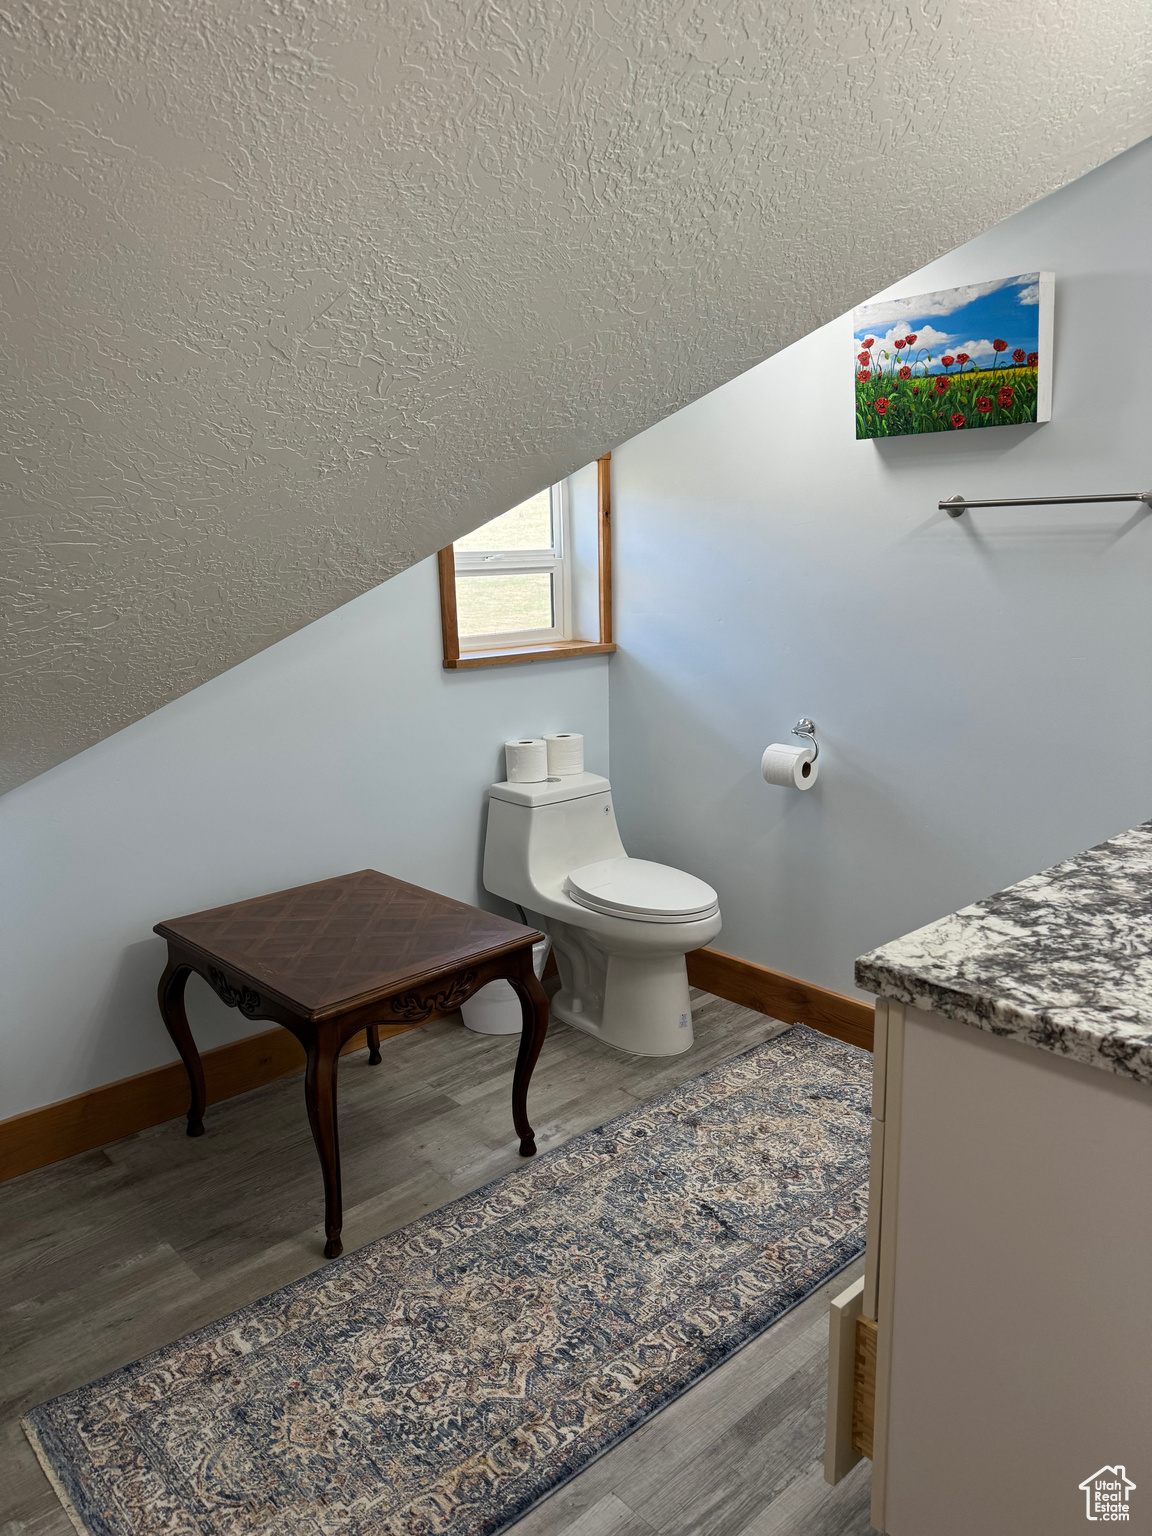 Bathroom with LVP flooring, vaulted ceiling, and toilet